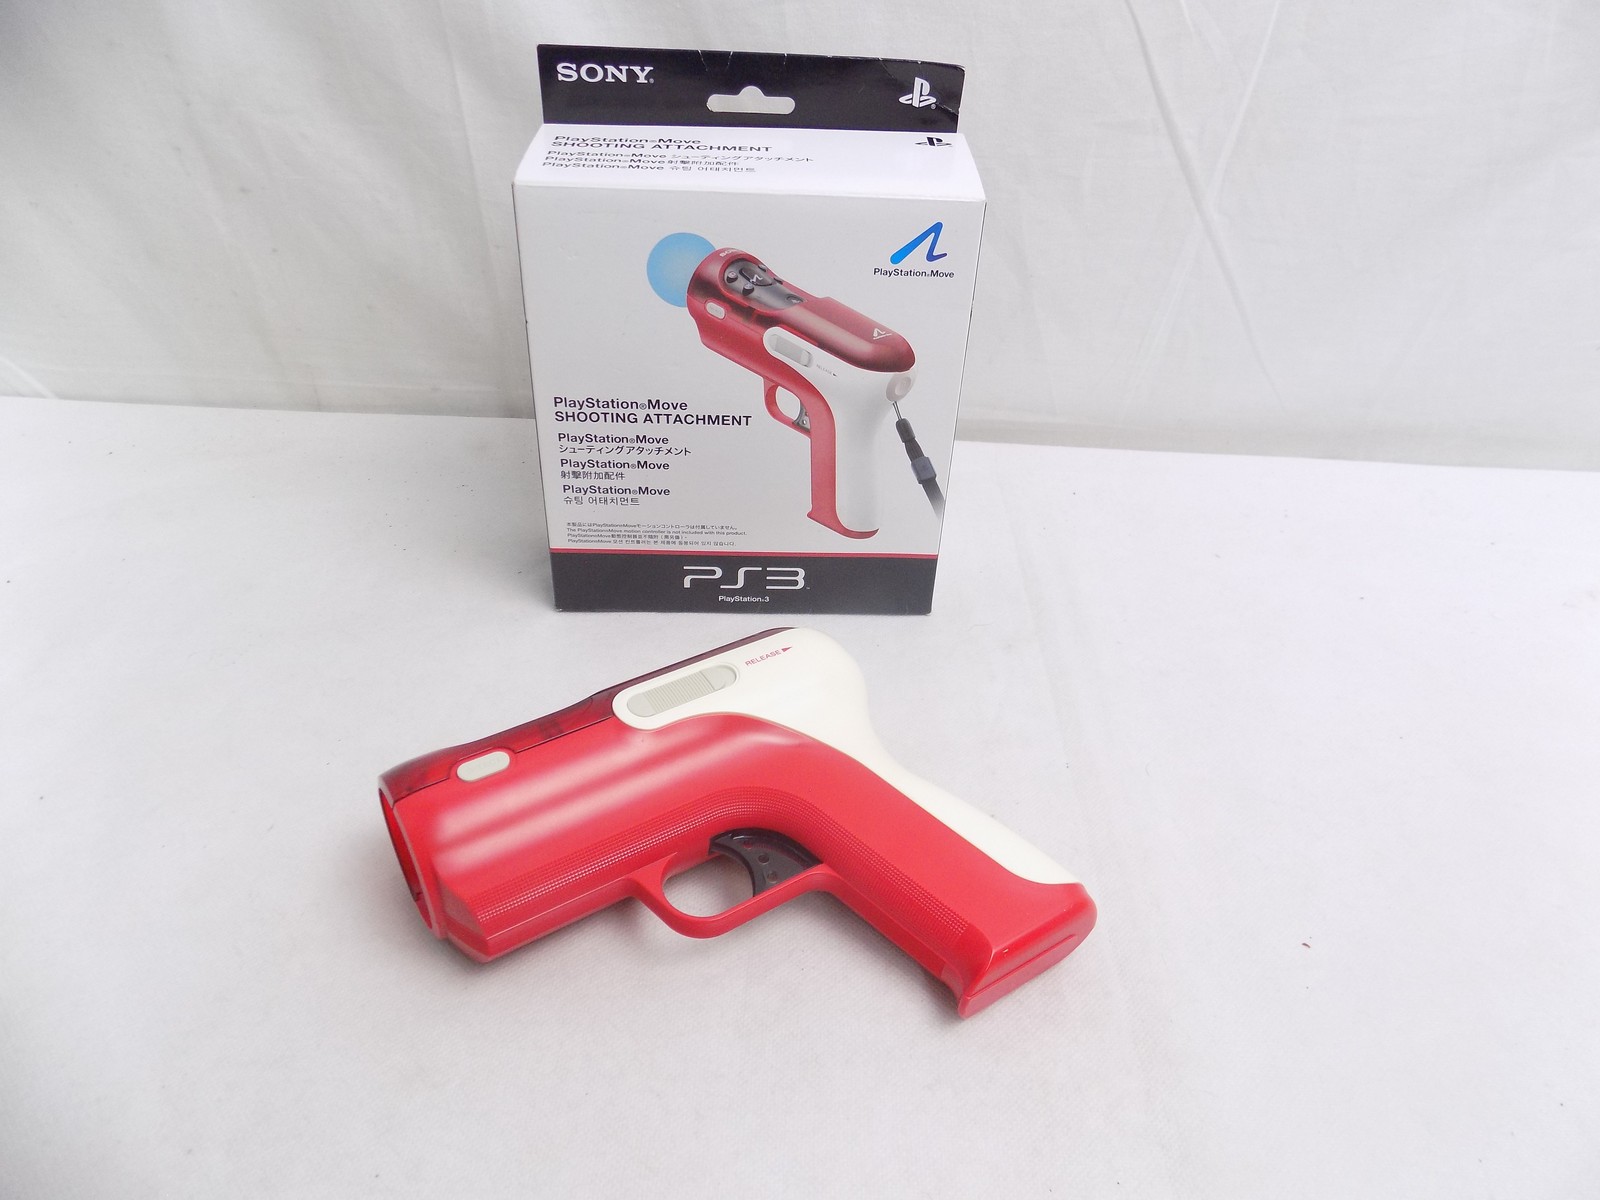 Sony Playstation 3 PS3 Move Shooting Attachment Red Gun Controller